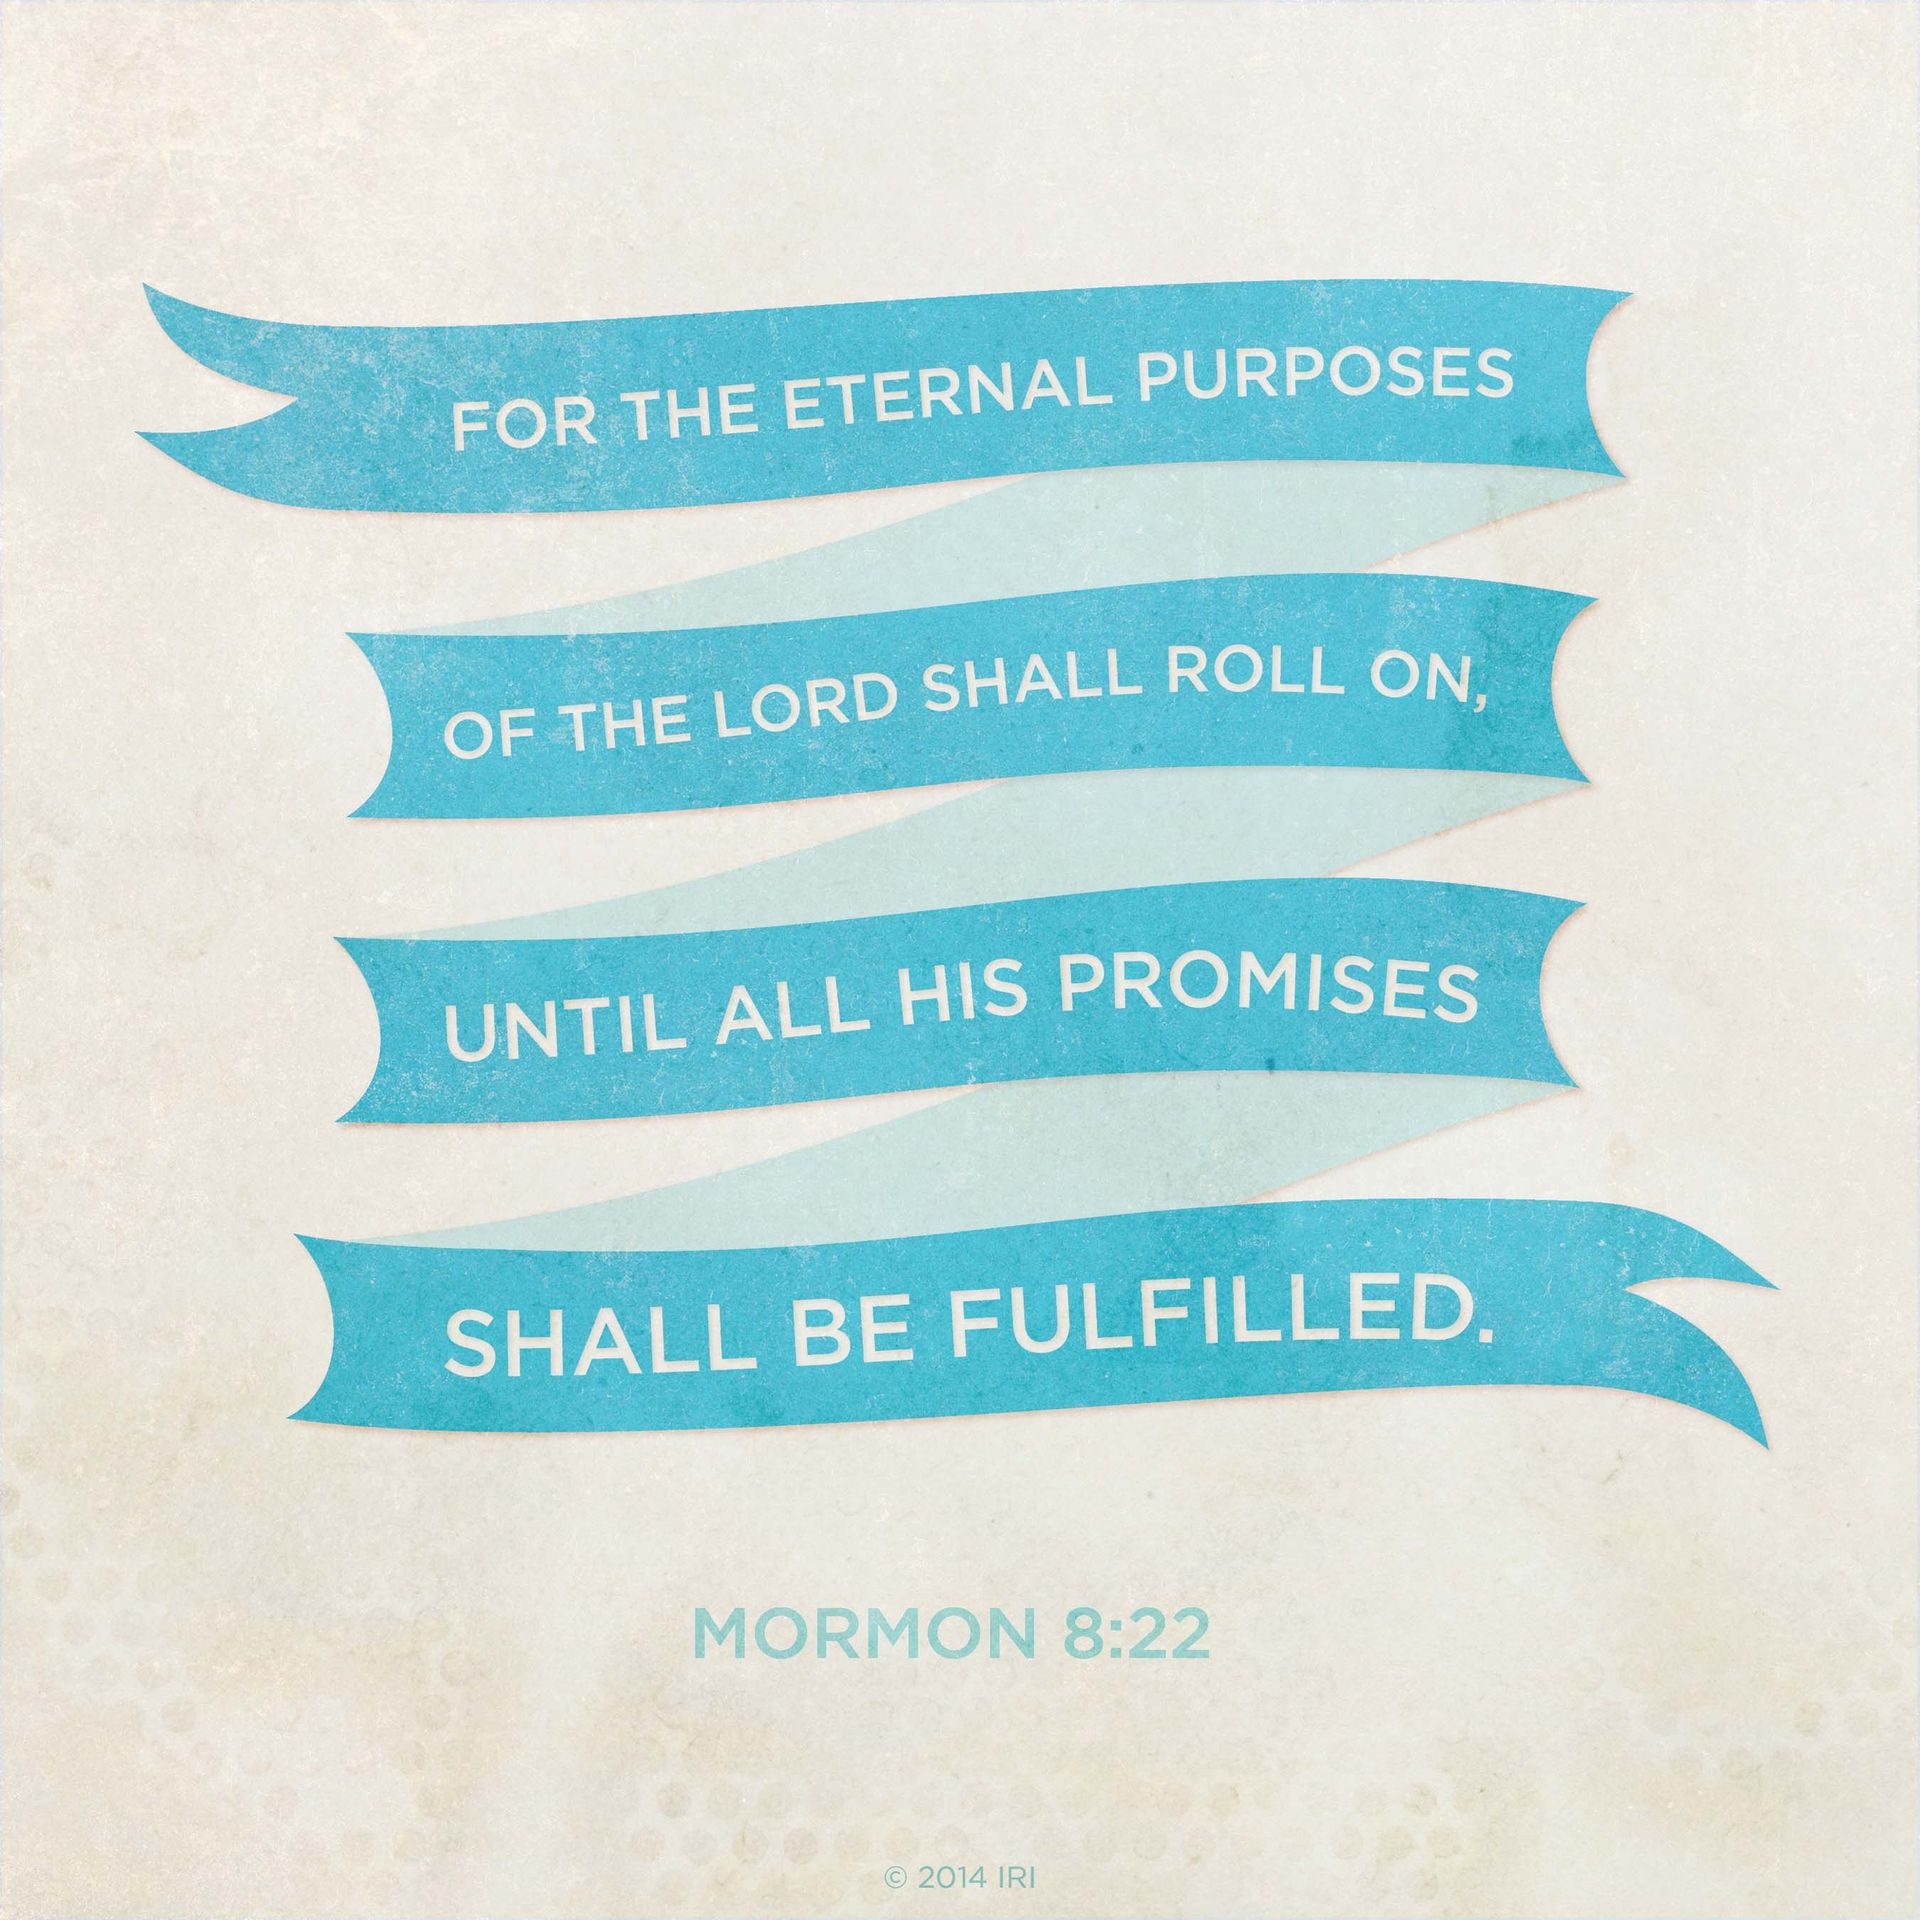 “For the eternal purposes of the Lord shall roll on, until all his promises shall be fulfilled.”—Mormon 8:22